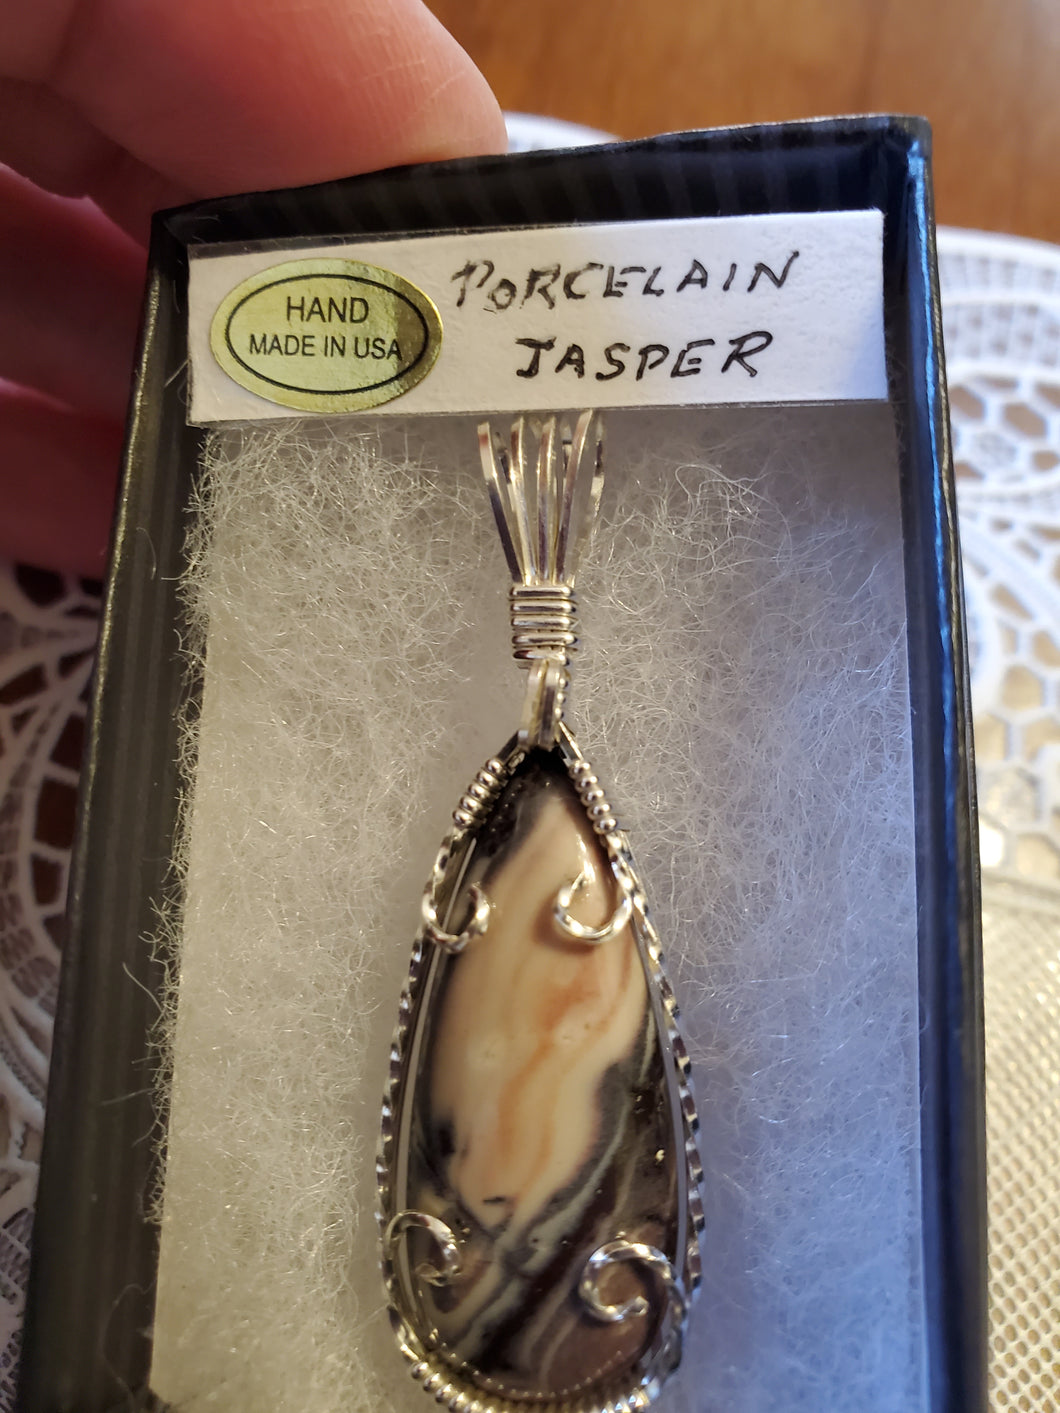 Custom Wire Wrapped Rare Porcelain Jasper Necklace/Pendant Sterling Silver